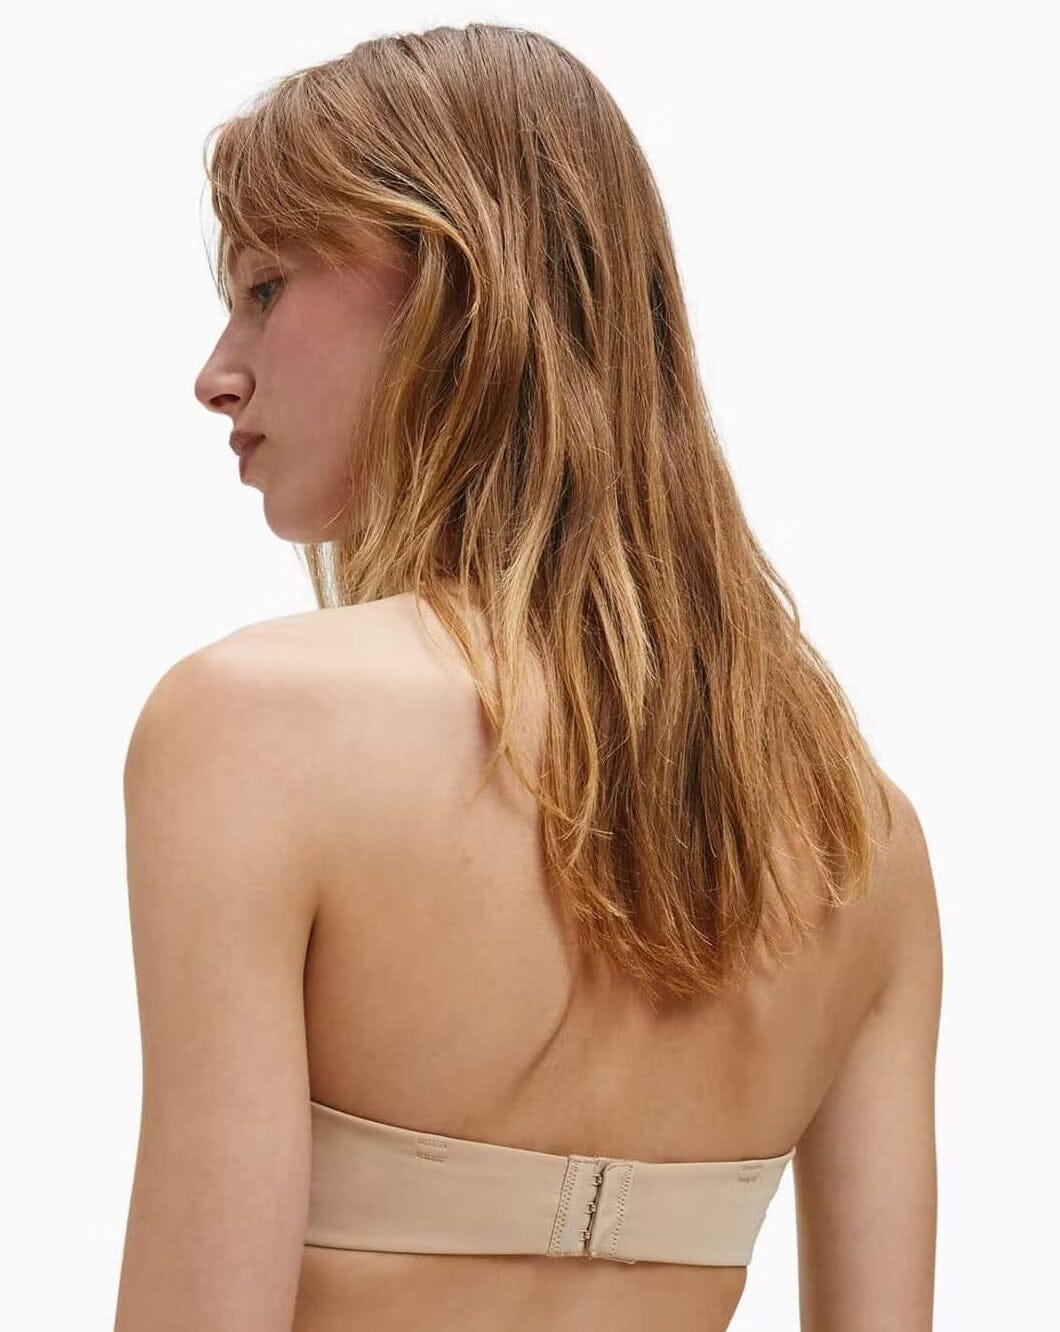 Styli Strapless Non-Wired Push-up Bra with Interchangeable Back Straps